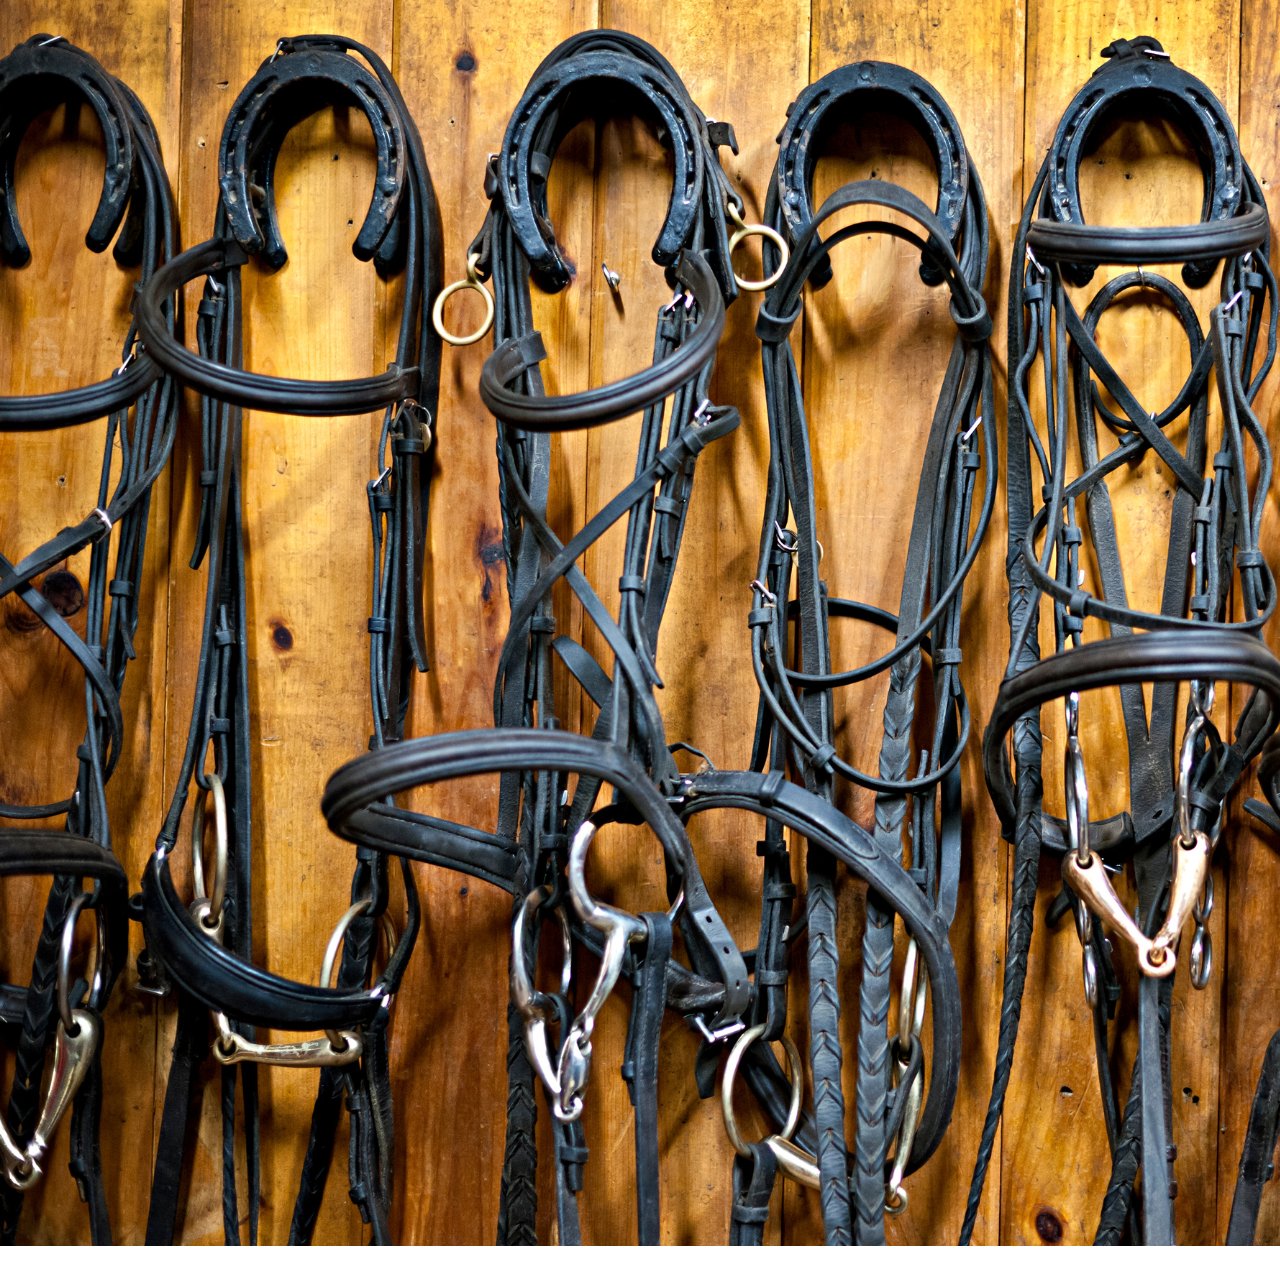 Bridles and Reins